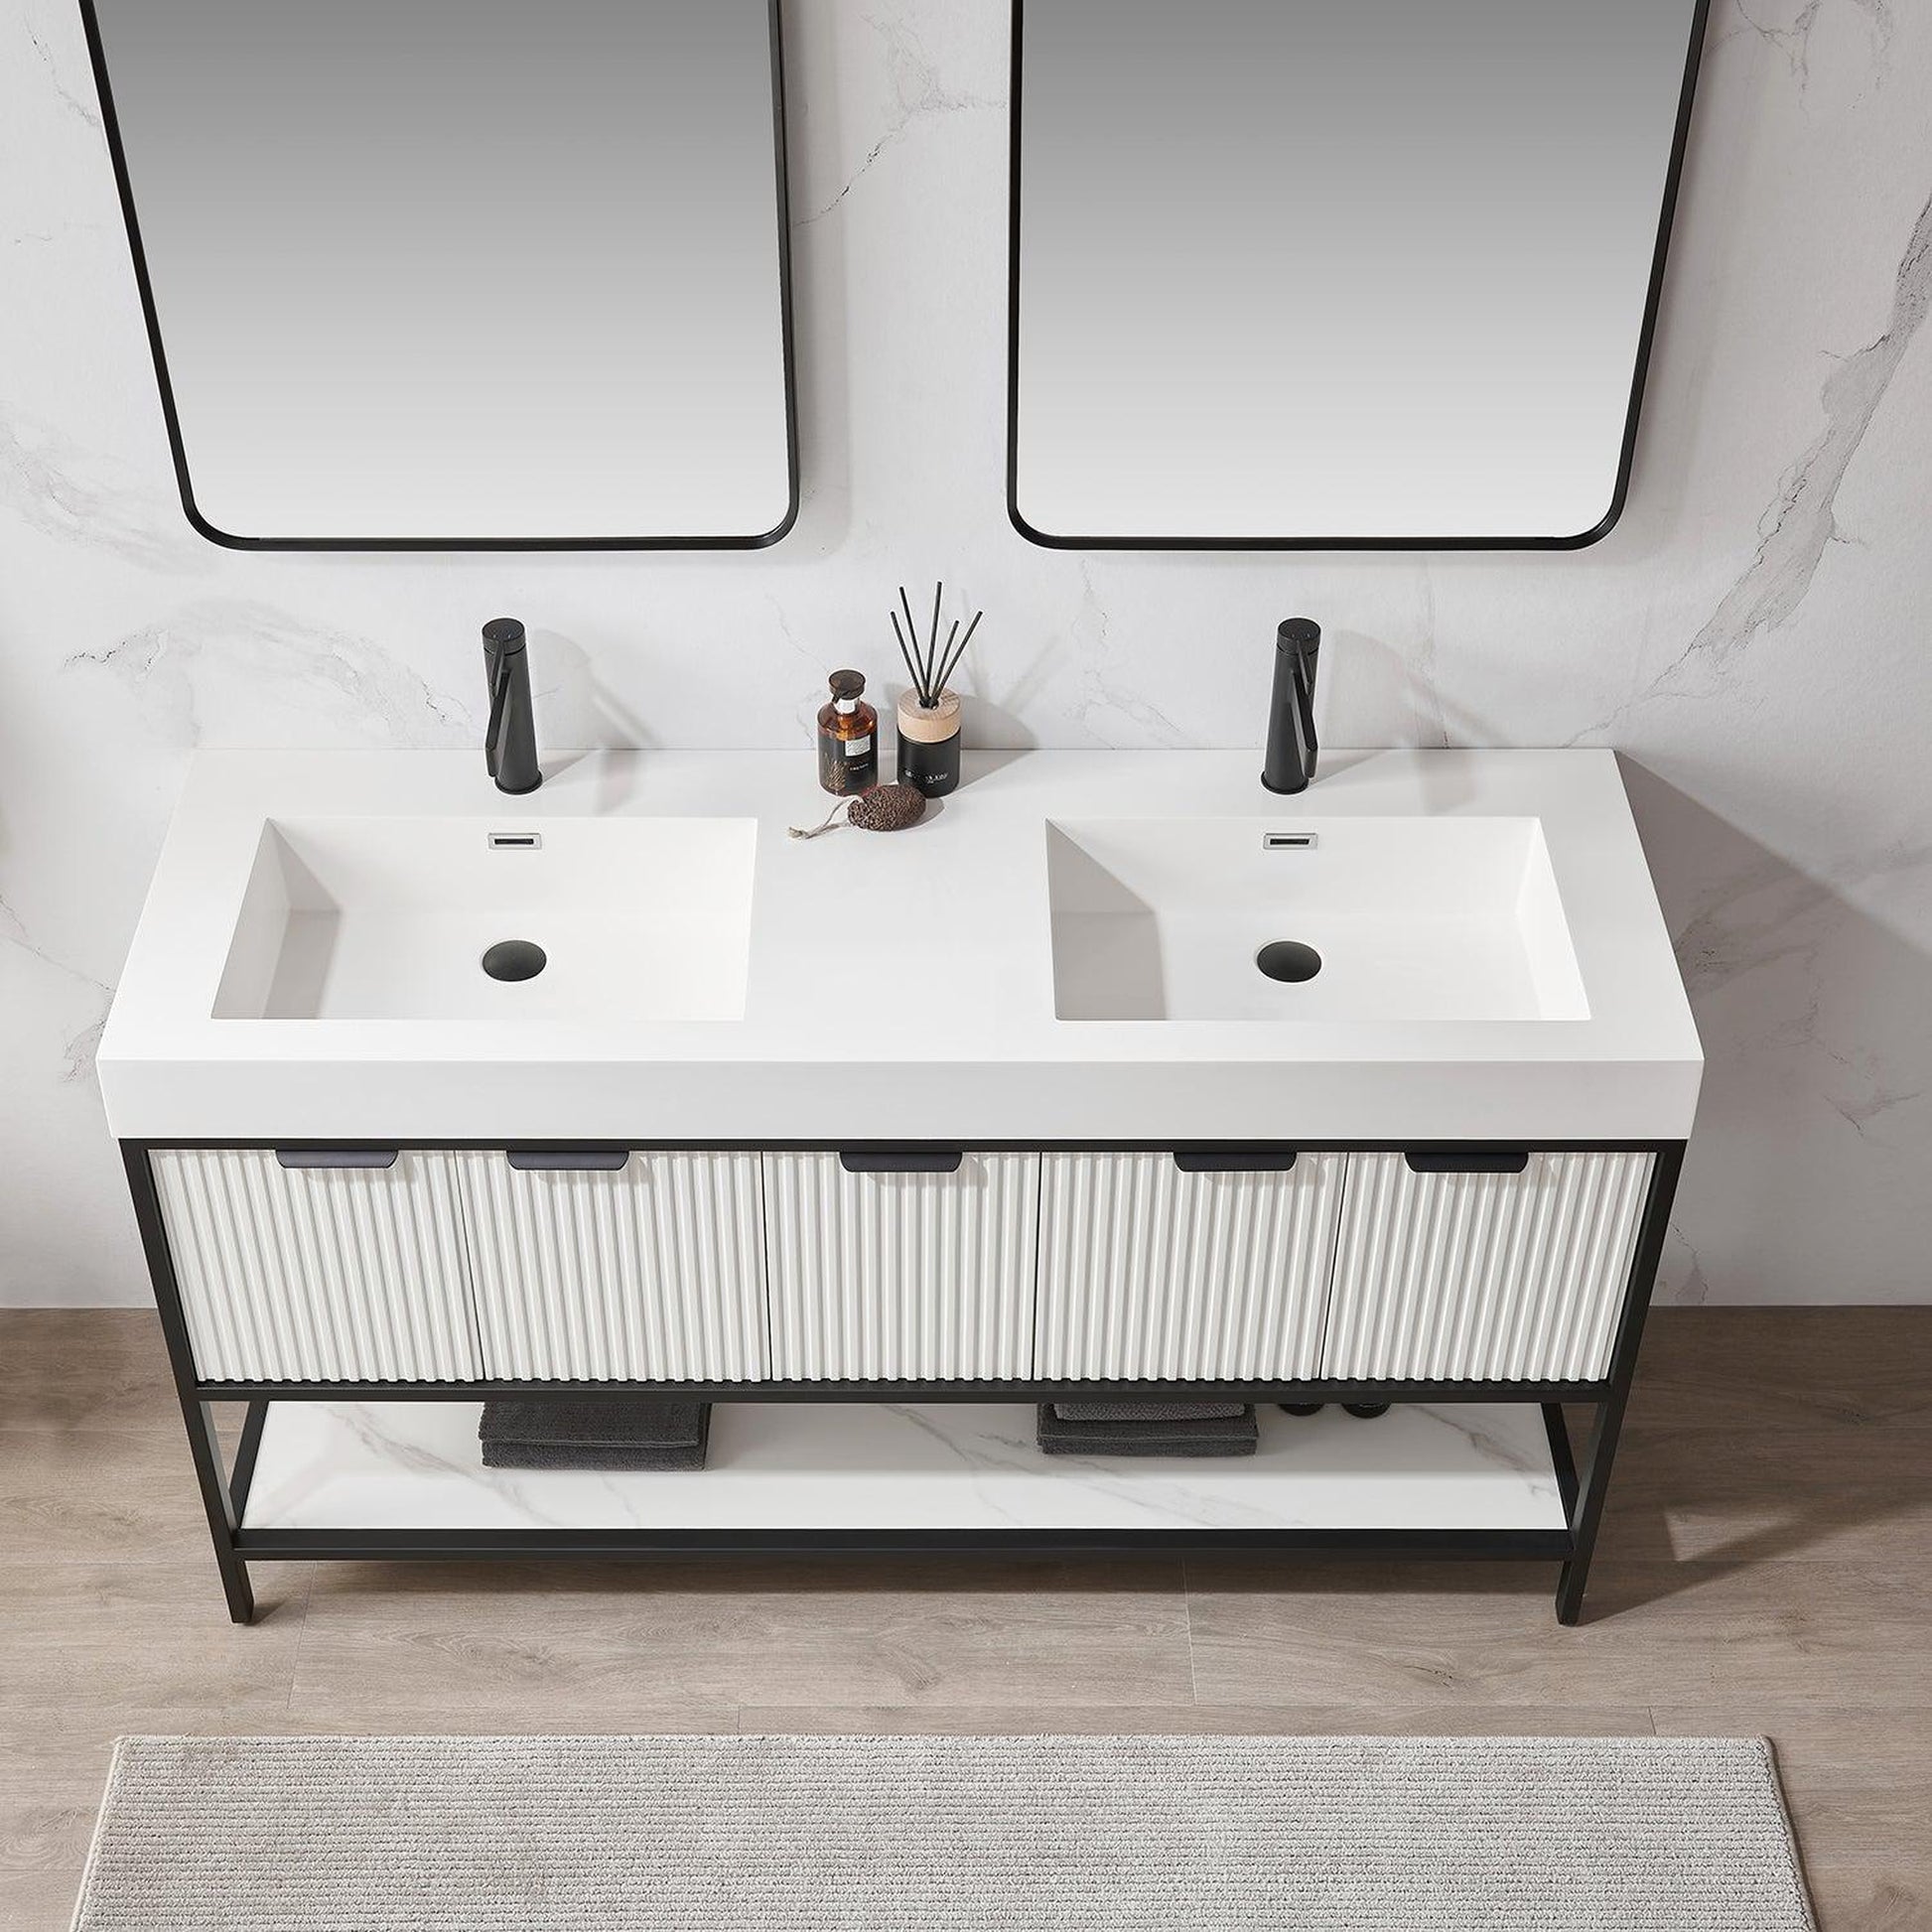 Vinnova Marcilla 60" Double Sink Bath Vanity In White With One-Piece Composite Stone Sink Top And Mirror